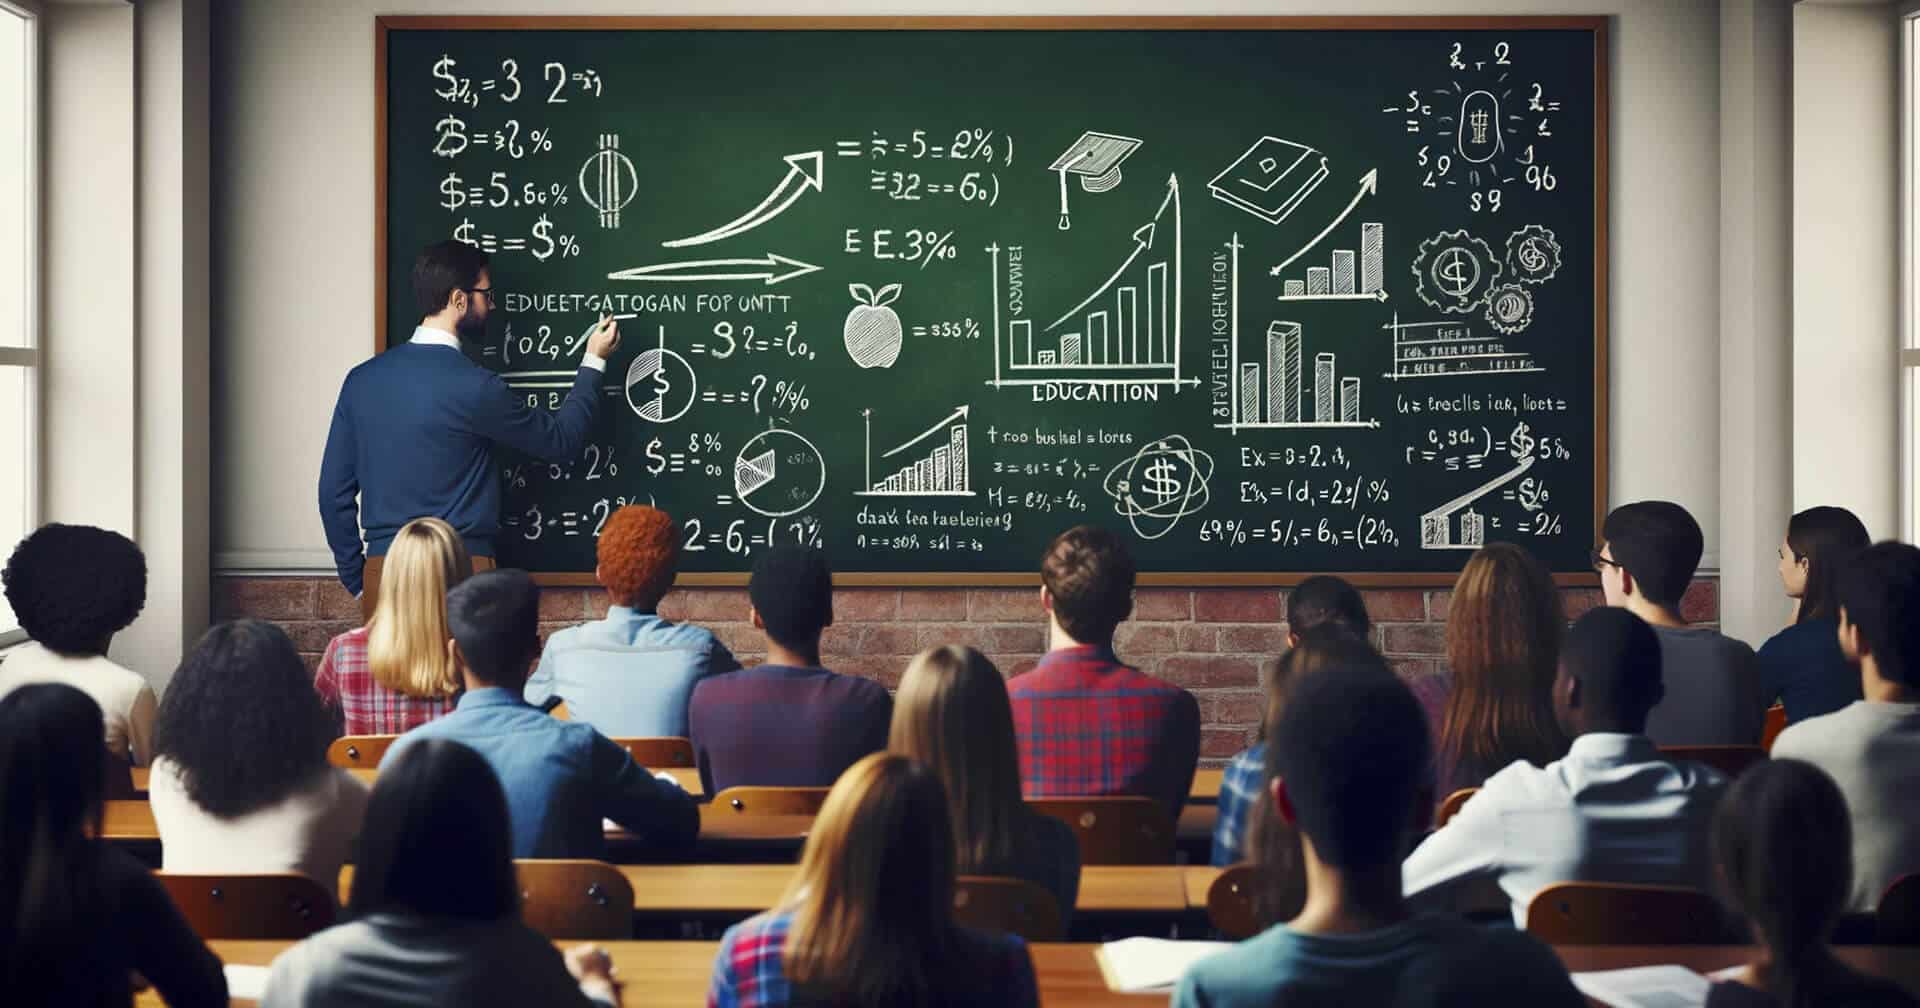 A group of people discussing the costs of education and careers while sitting in front of a chalkboard.